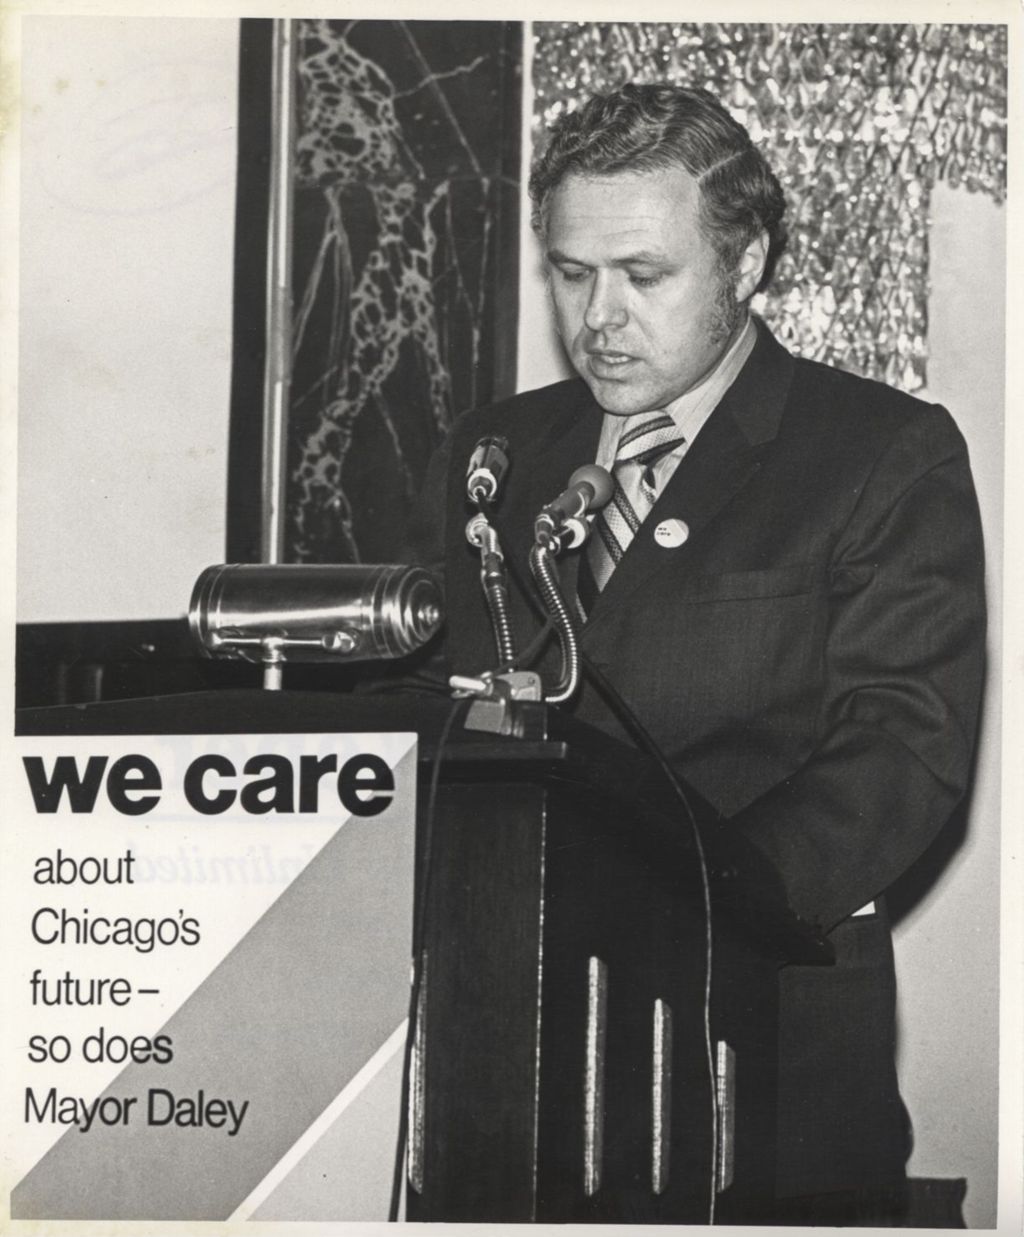 Miniature of Man speaking at a "We Care" event